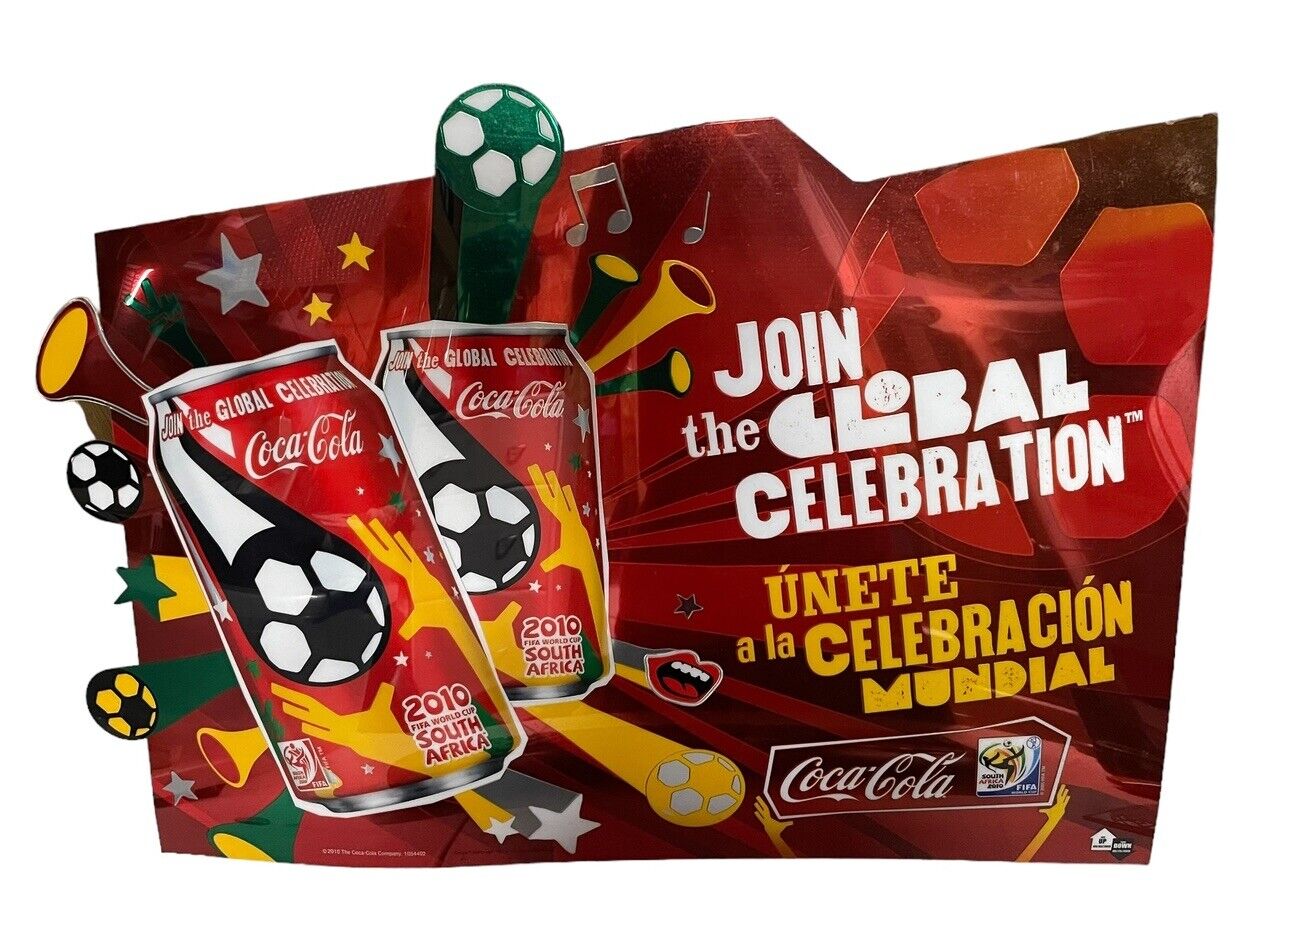 FOIL 2010 COCA COLA POSTER SOUTH AFRICA SOCCER FOOTBALL FIFA WORLD CUP - RARE